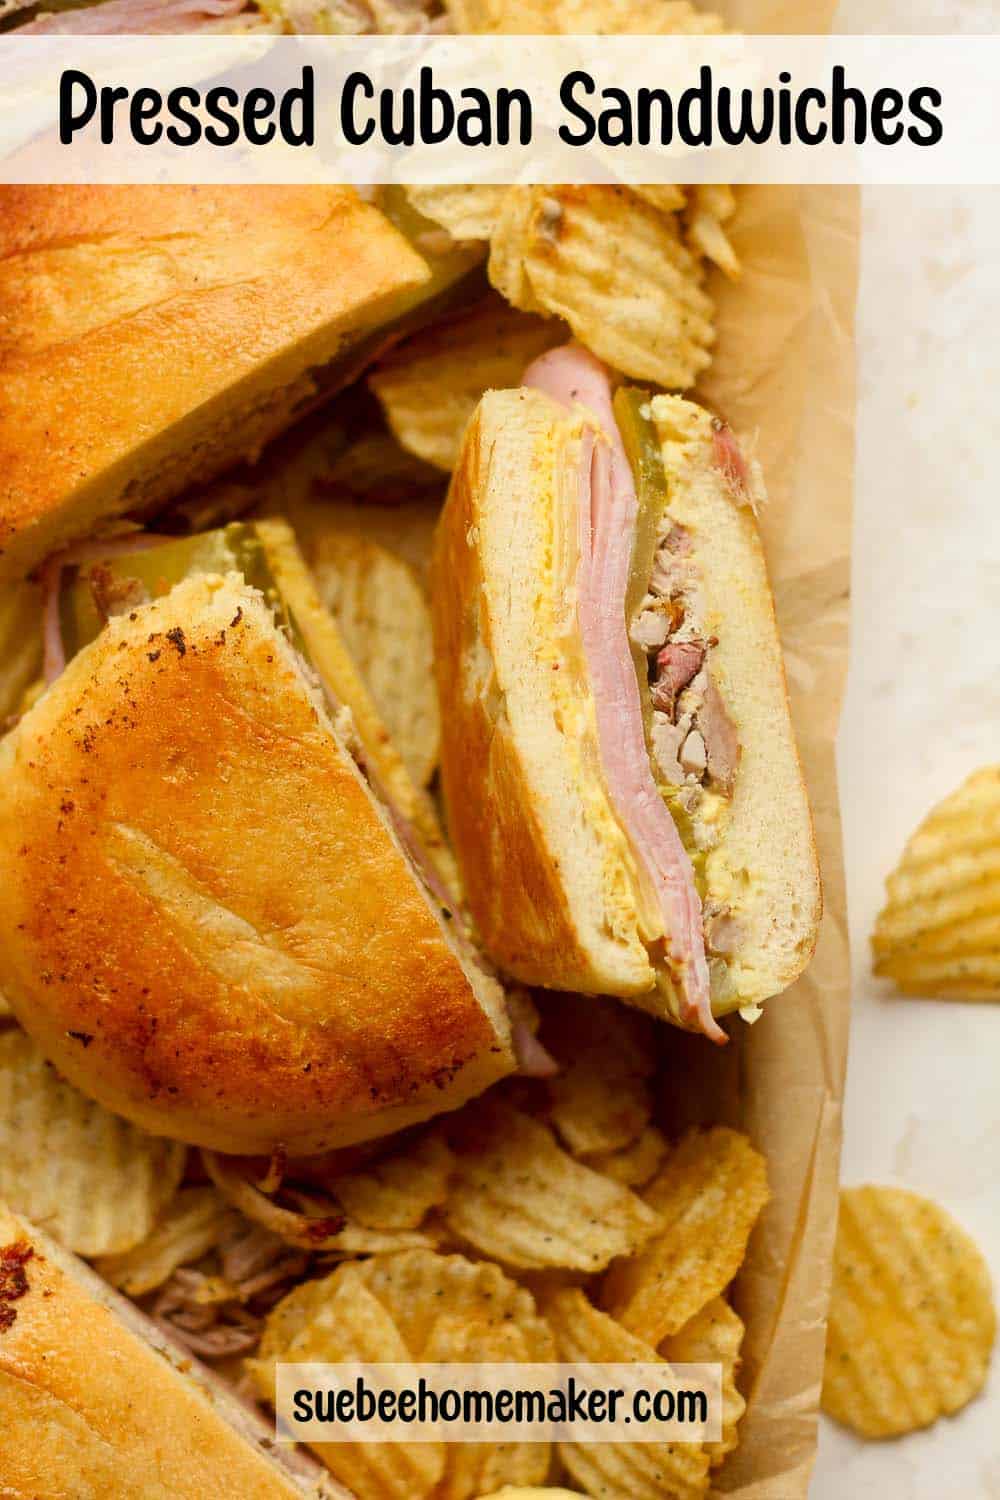 A pan of pressed Cuban sandwiches with chips.